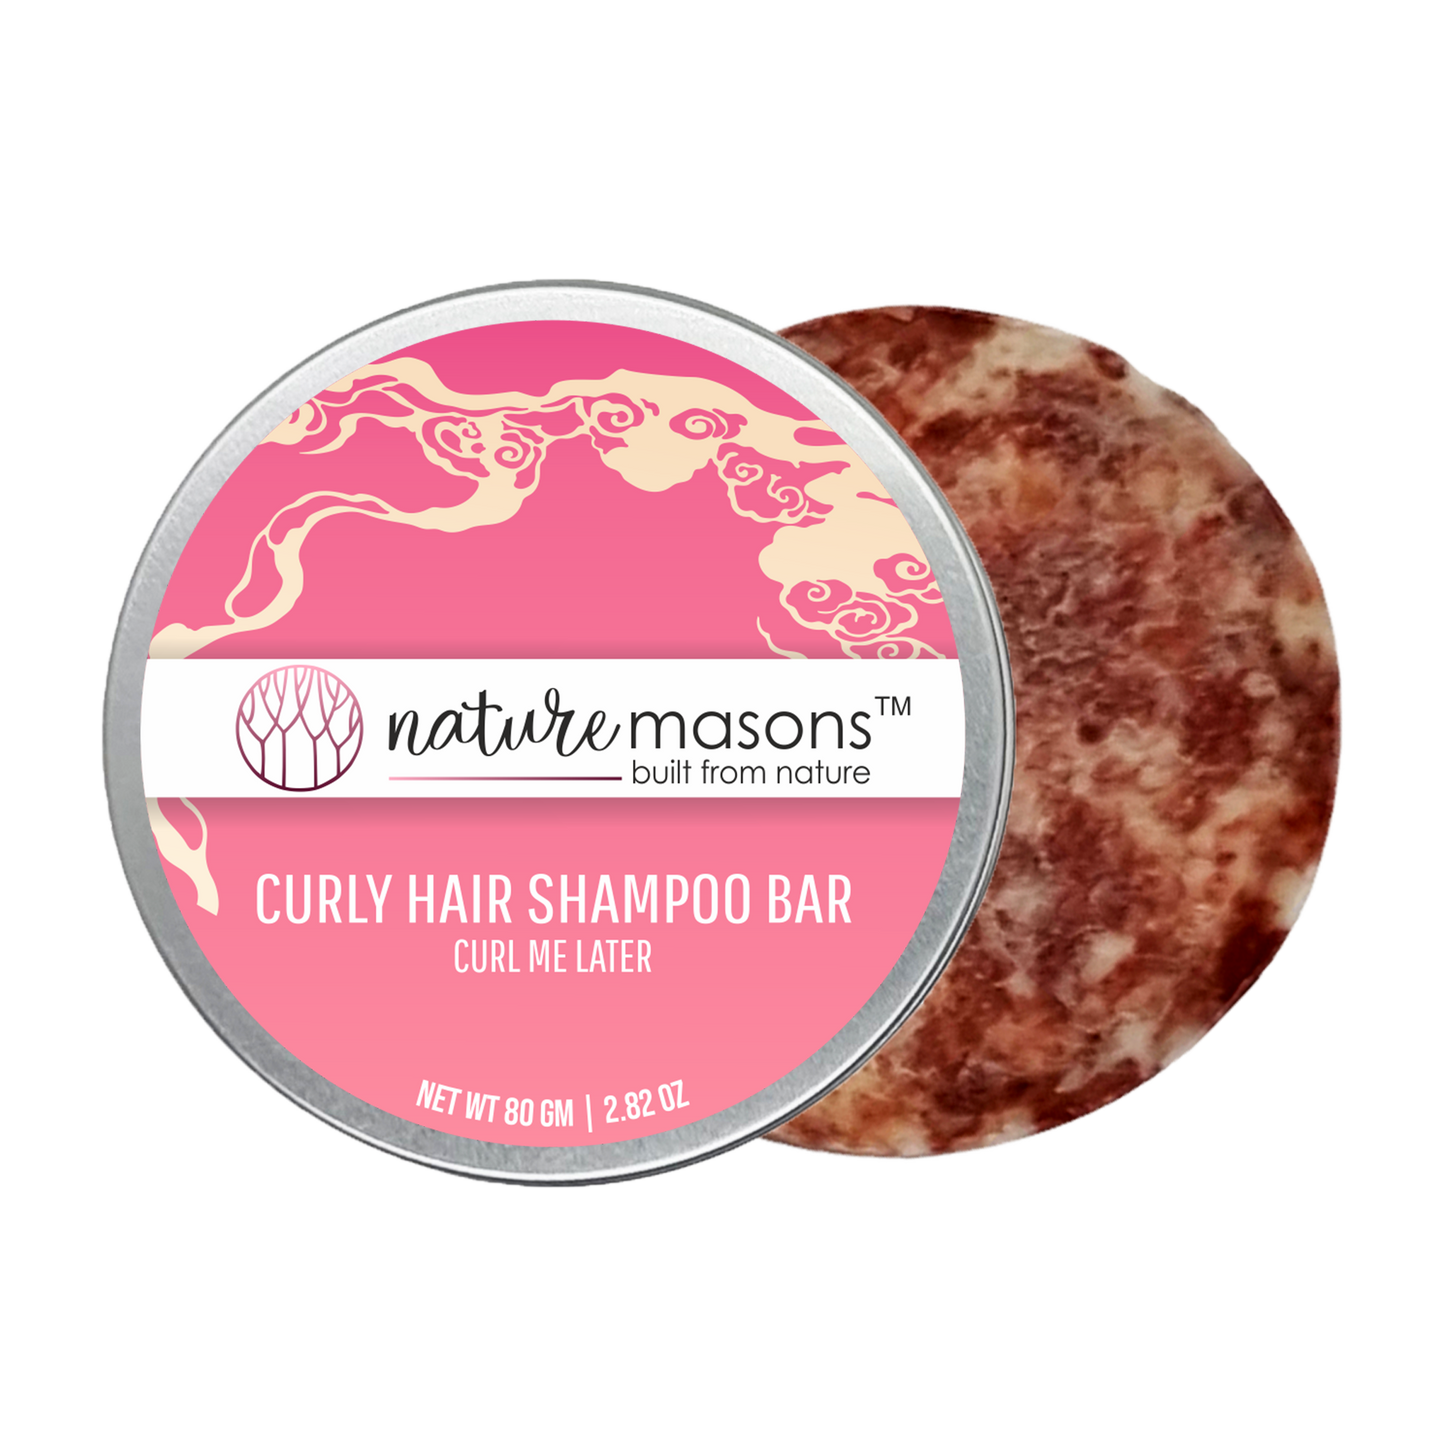 Curl Me Later - Curly Hair Shampoo Bar (Sulphate Free) The Nature Masons